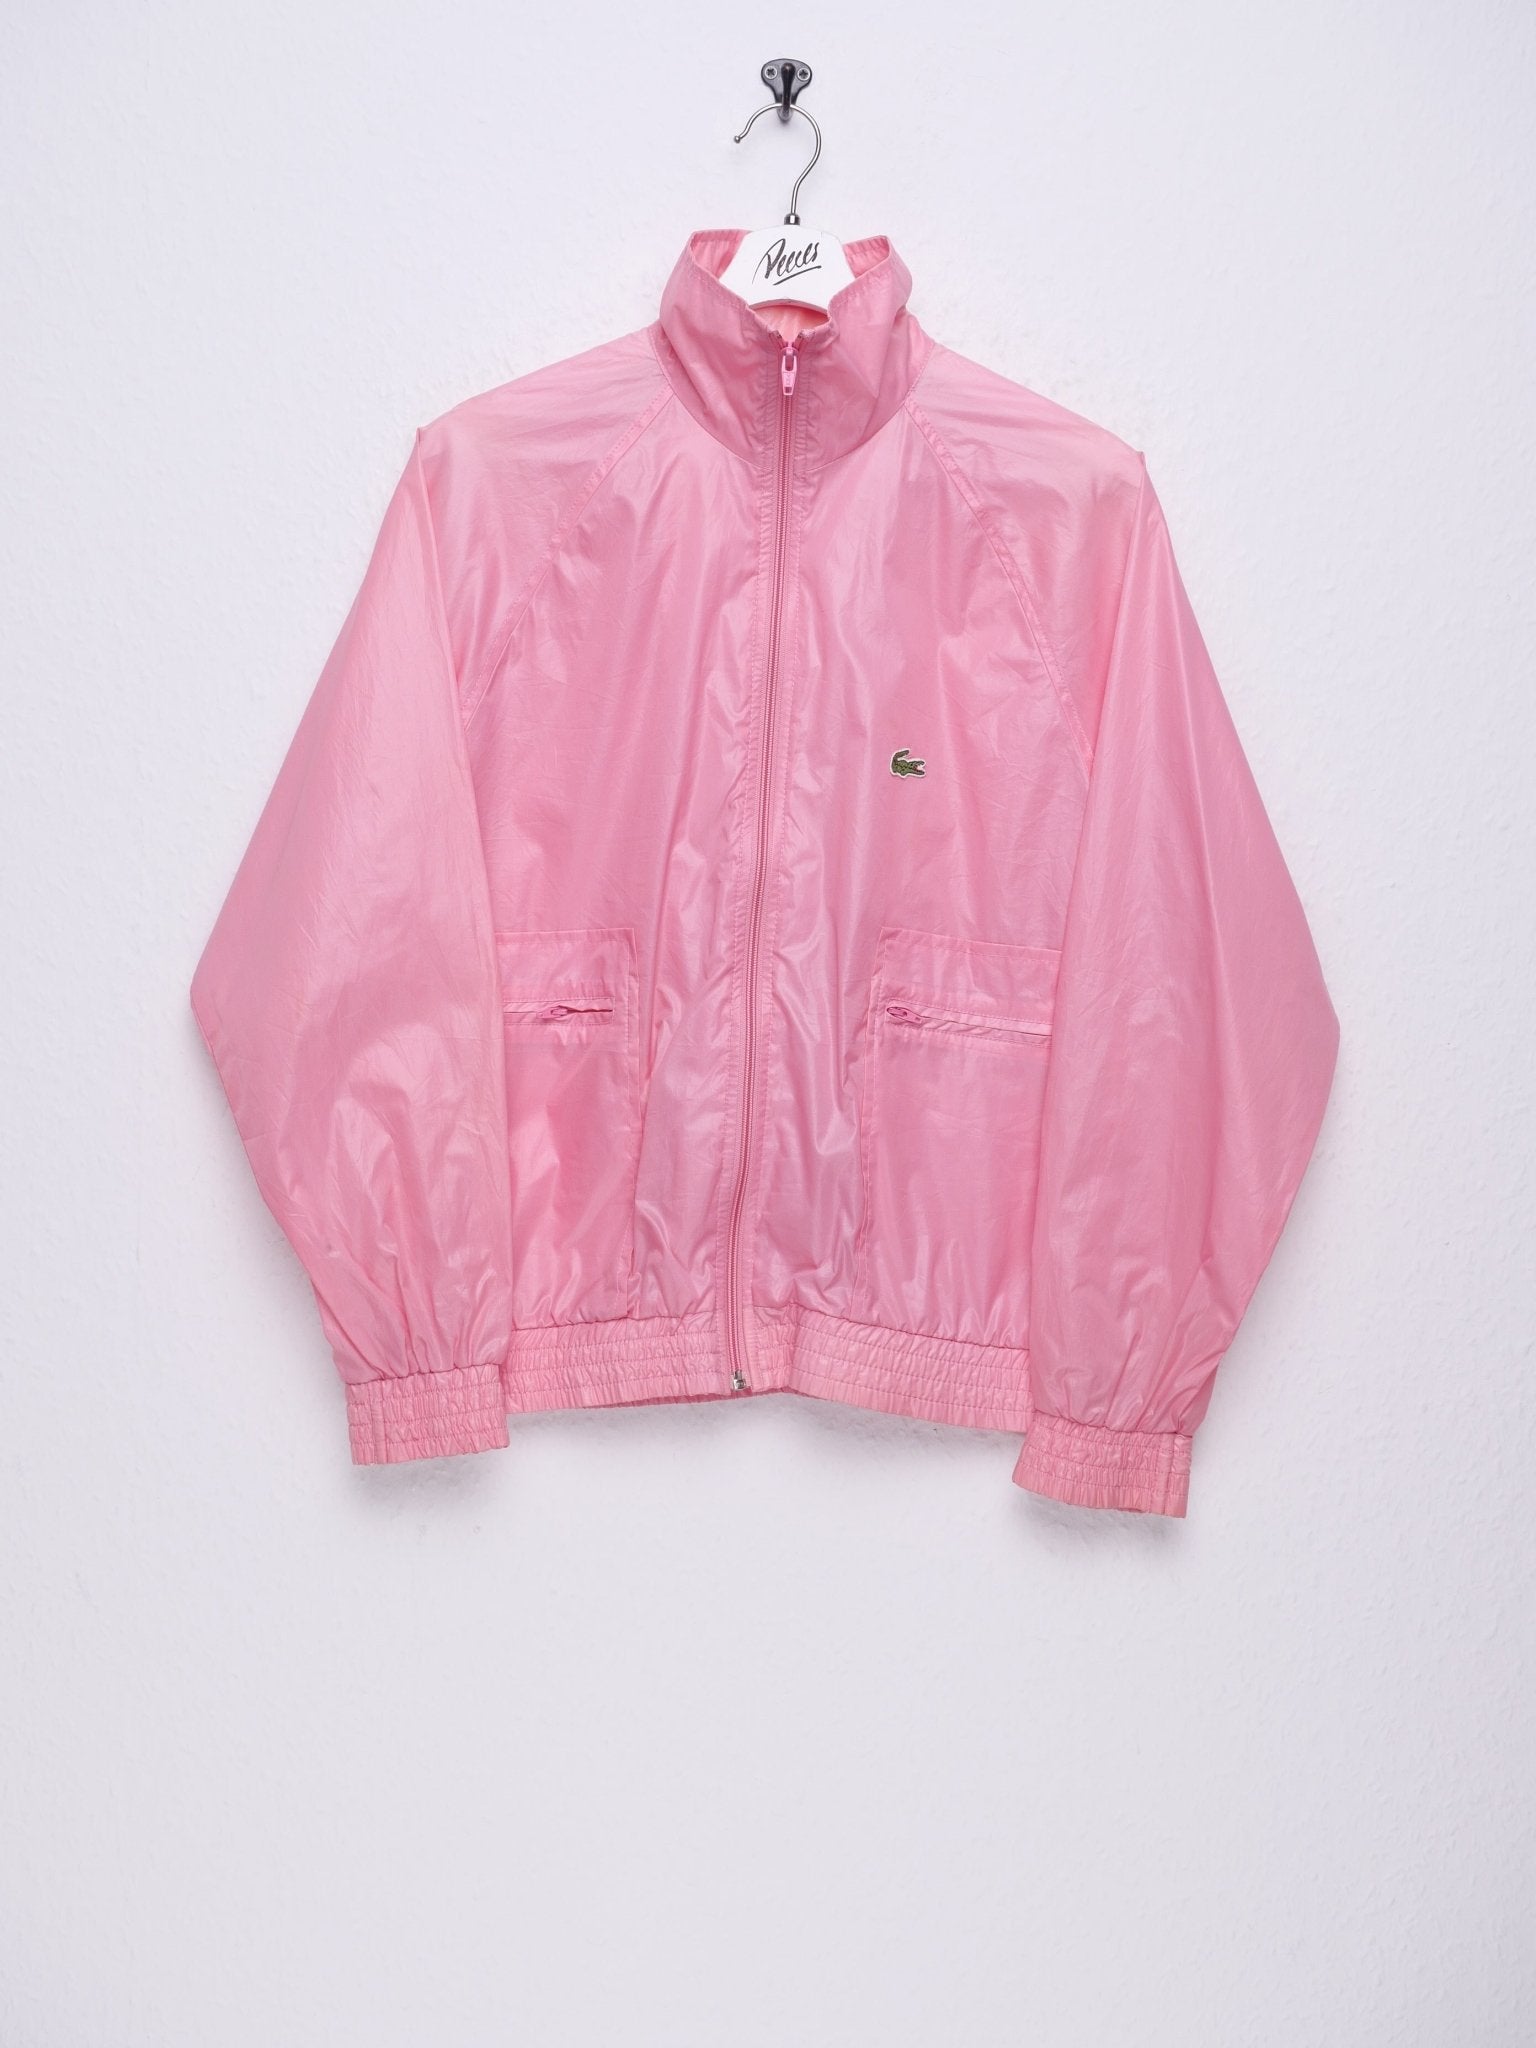 Lacoste patched Logo pink Vintage Track Jacke - Peeces